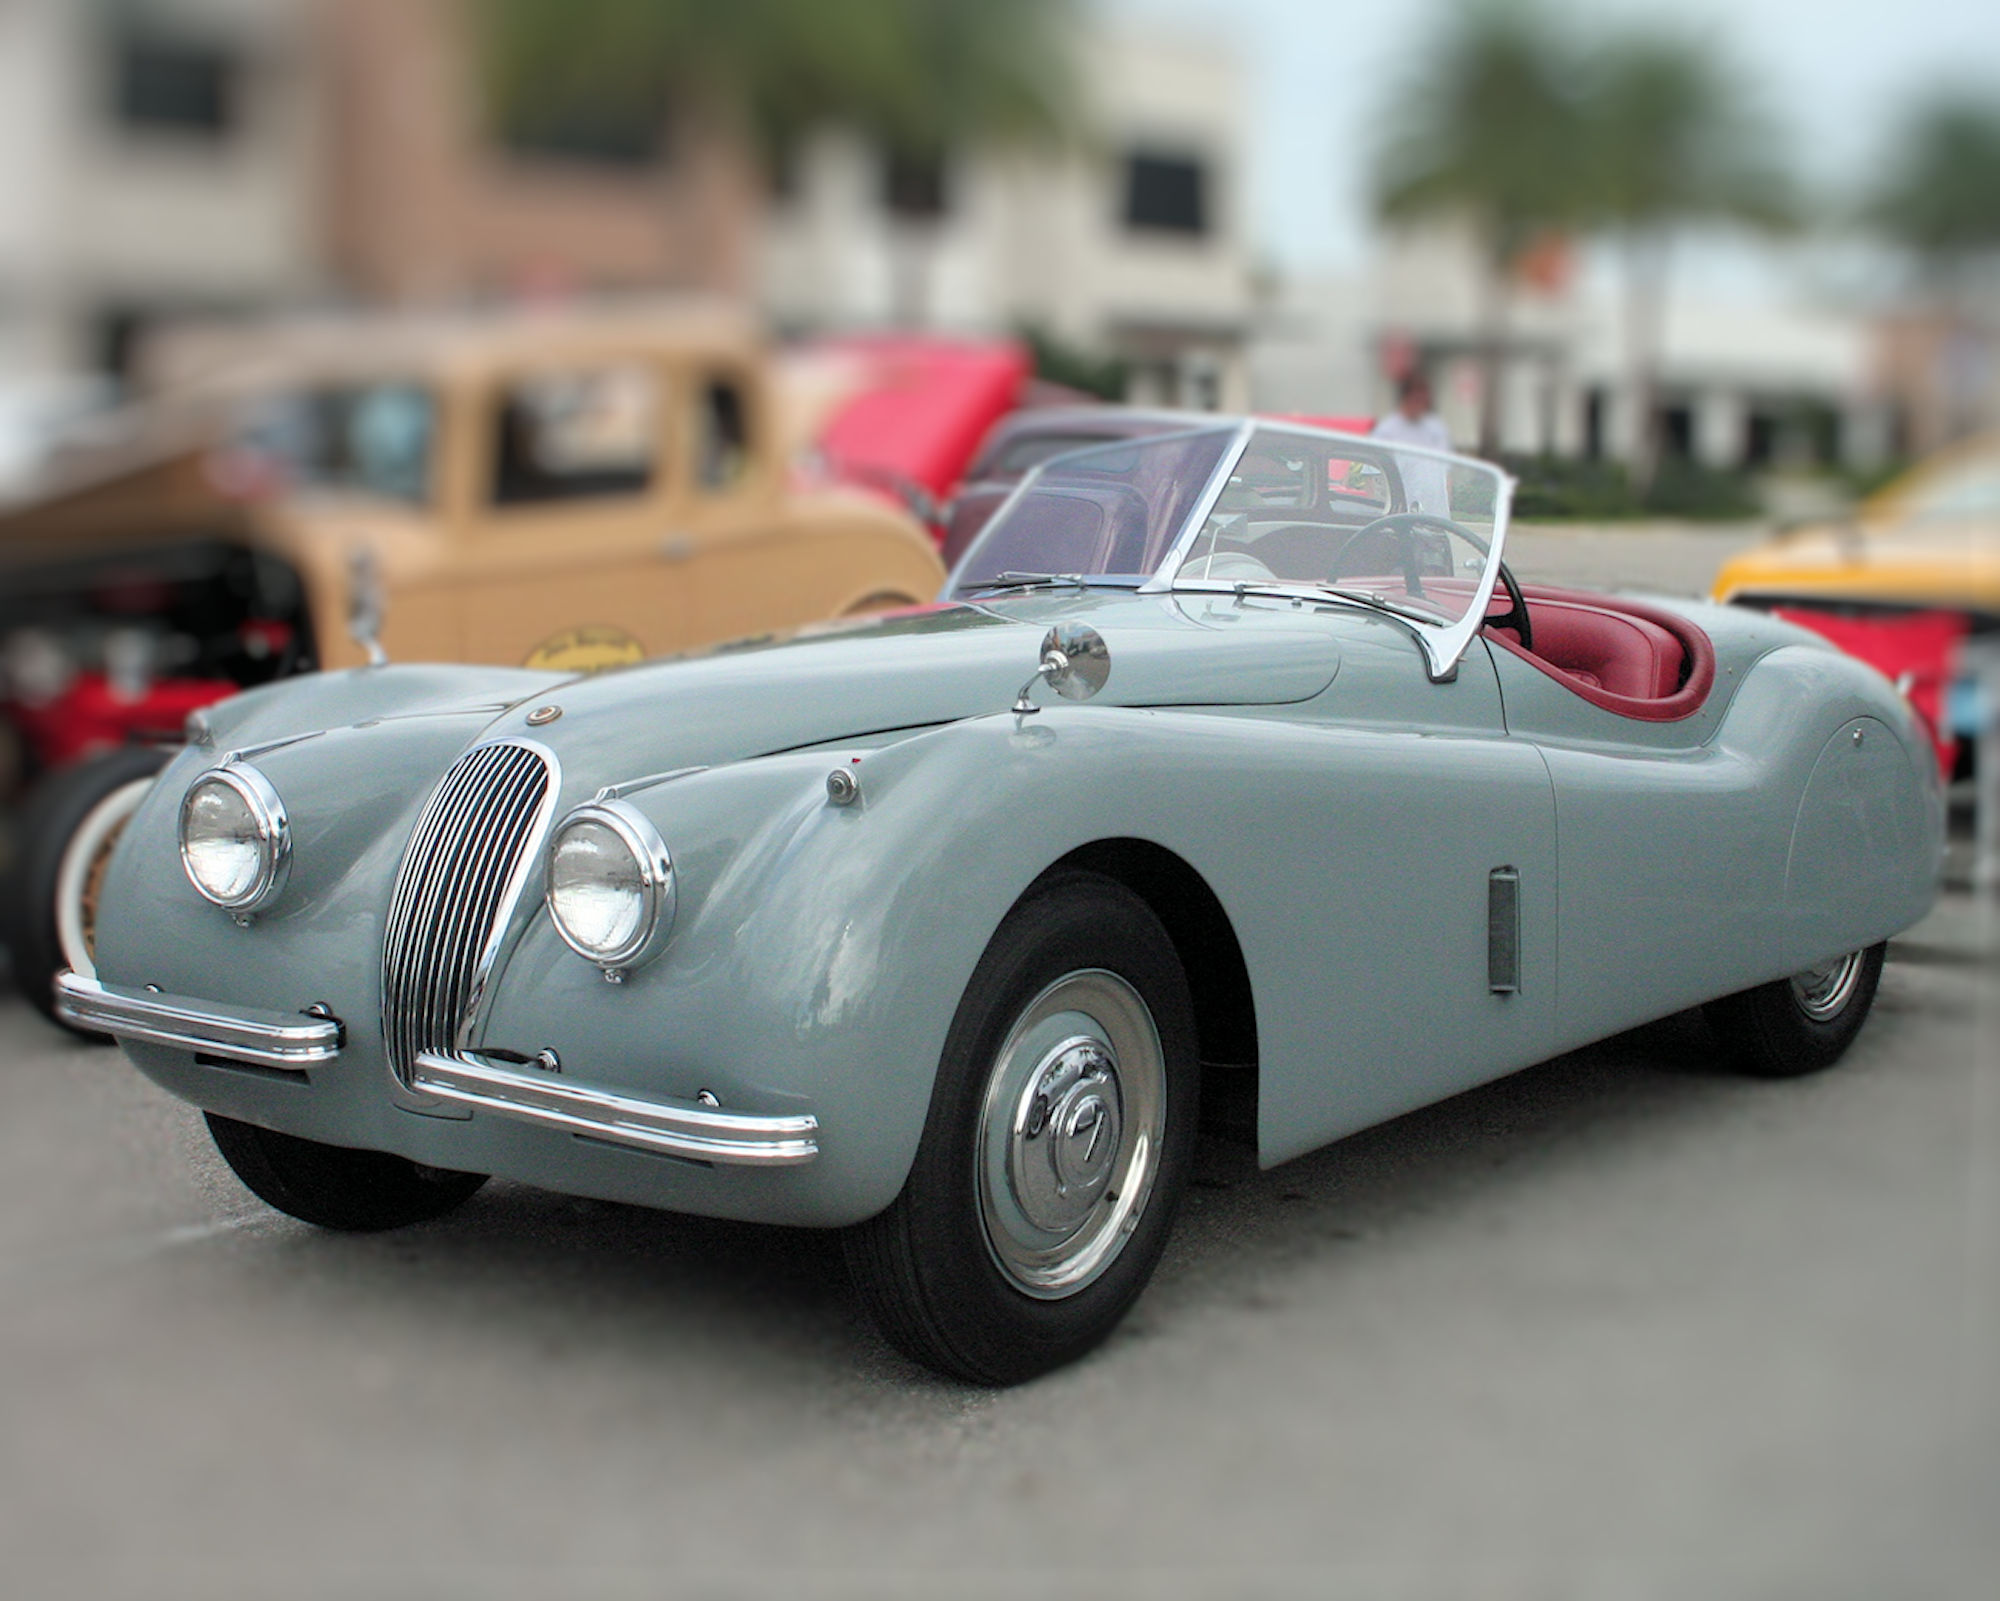 Incredible Naples antique car show 2015 with Best Inspiration